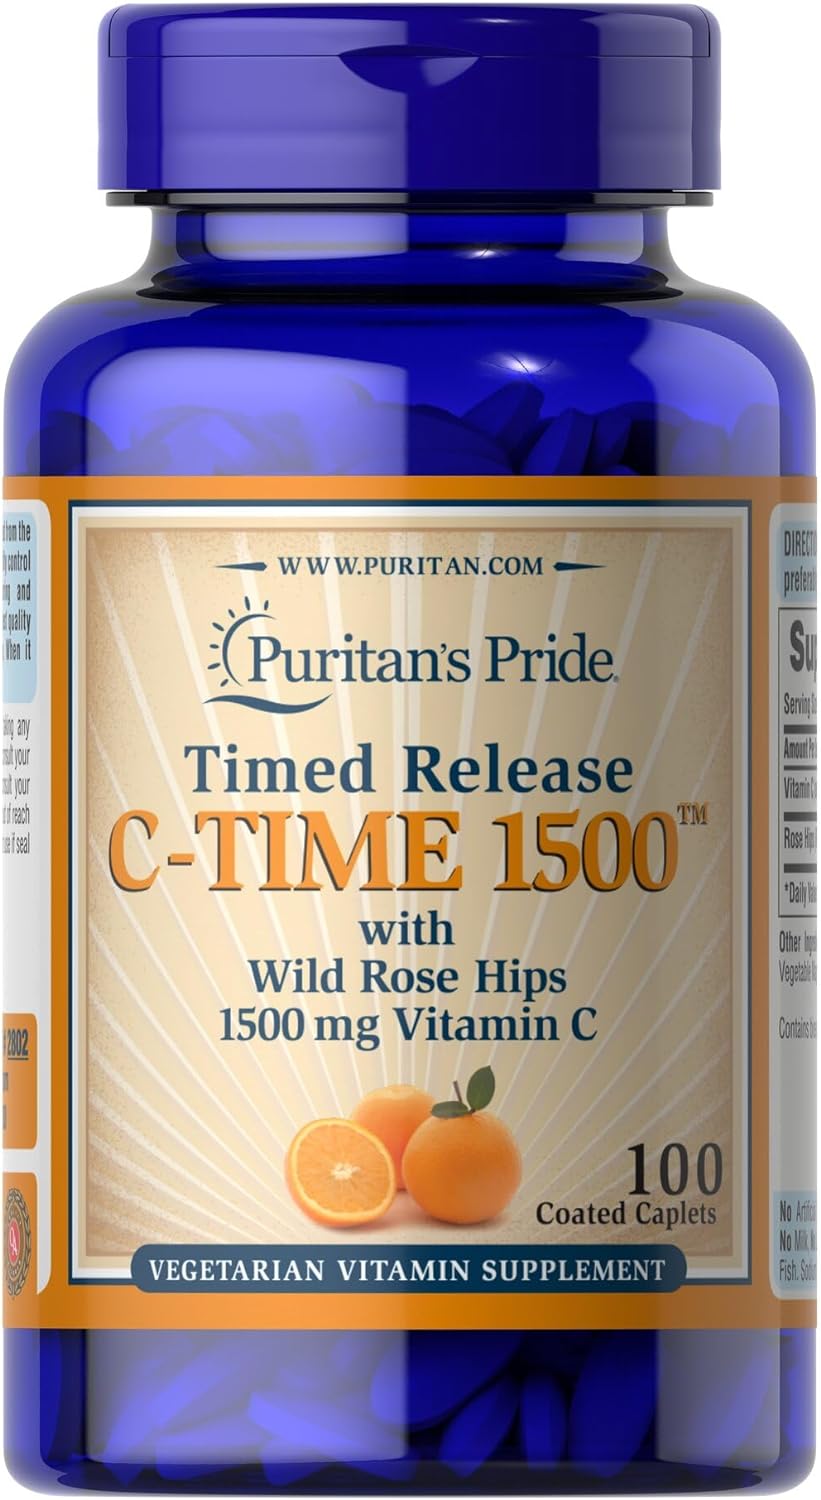 Puritan's Pride Vitamin C1500 mg with Rose Hips Timed Release 100 Caplets (2802)